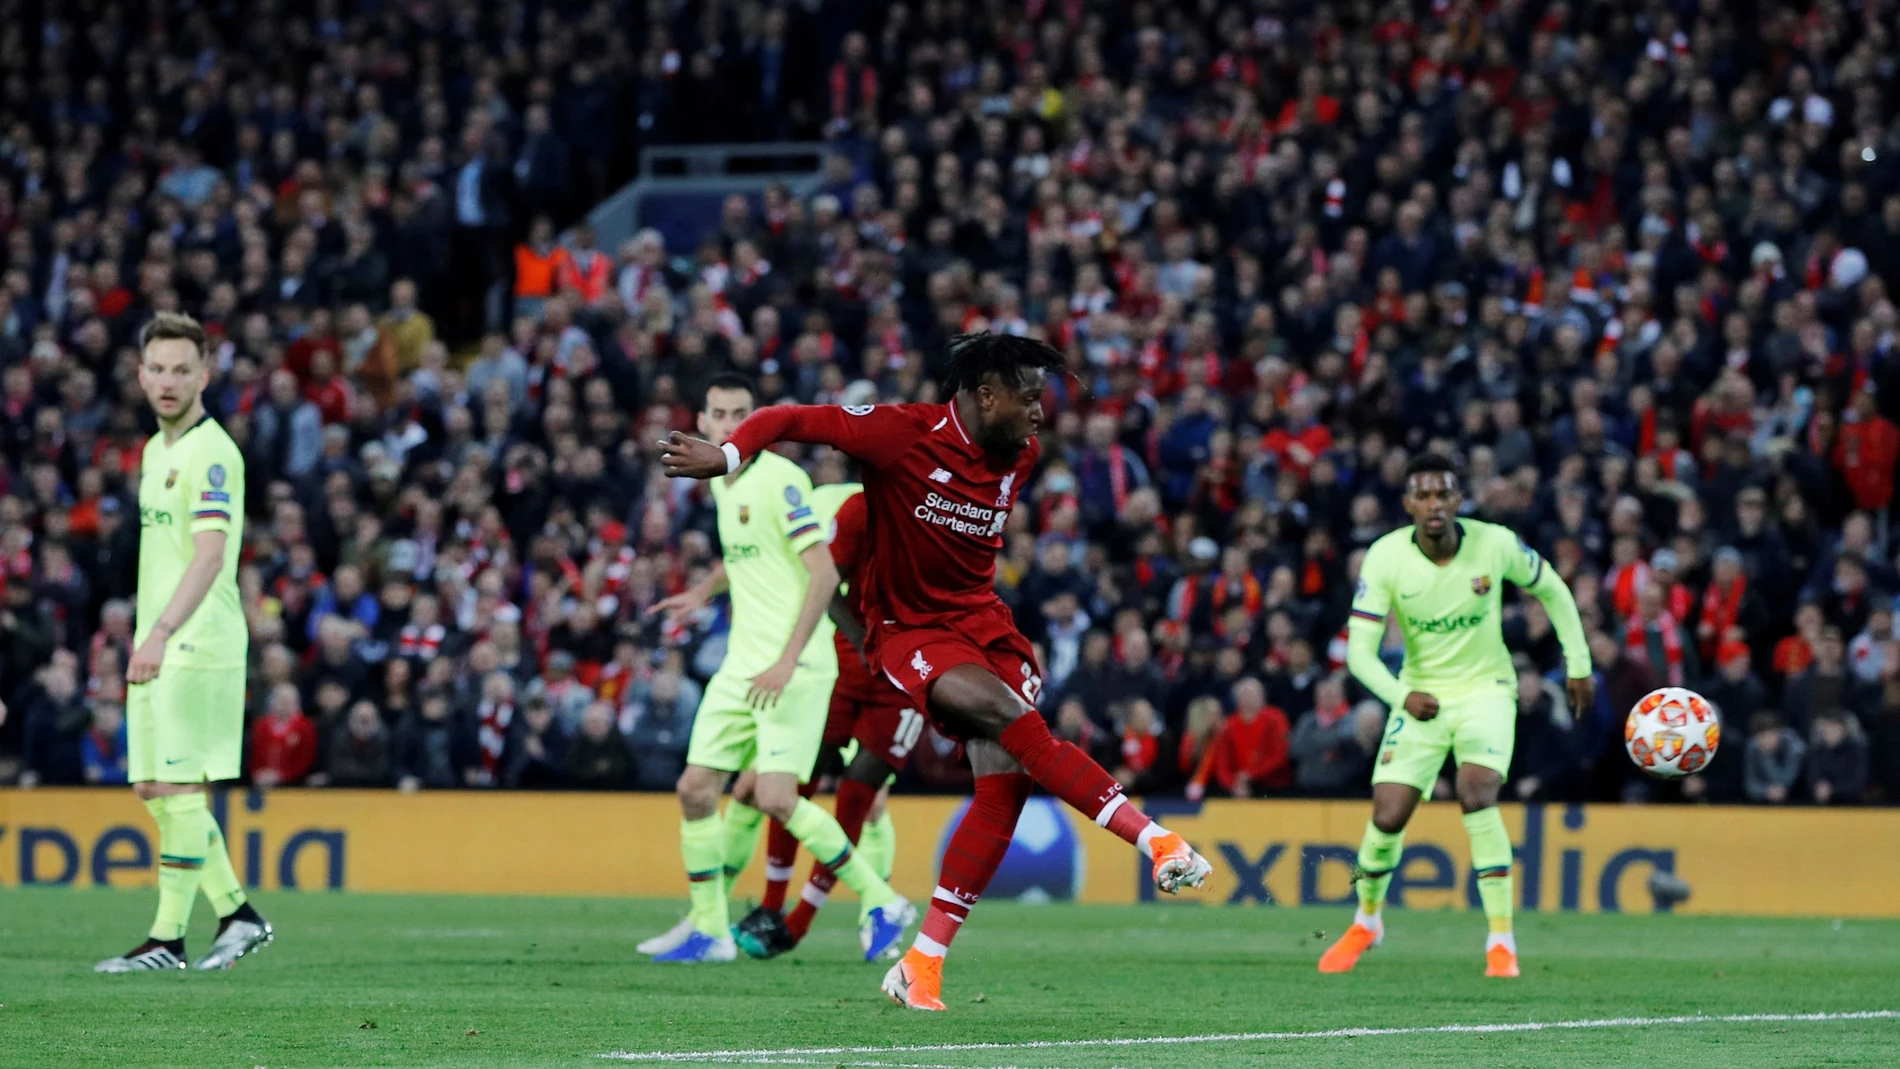 FILE PHOTO: Liverpool striker Divock Origi scores their fourth goal in a 4-0 victory against Barcelona in the second leg of the Champions League semi-finals at Anfield.